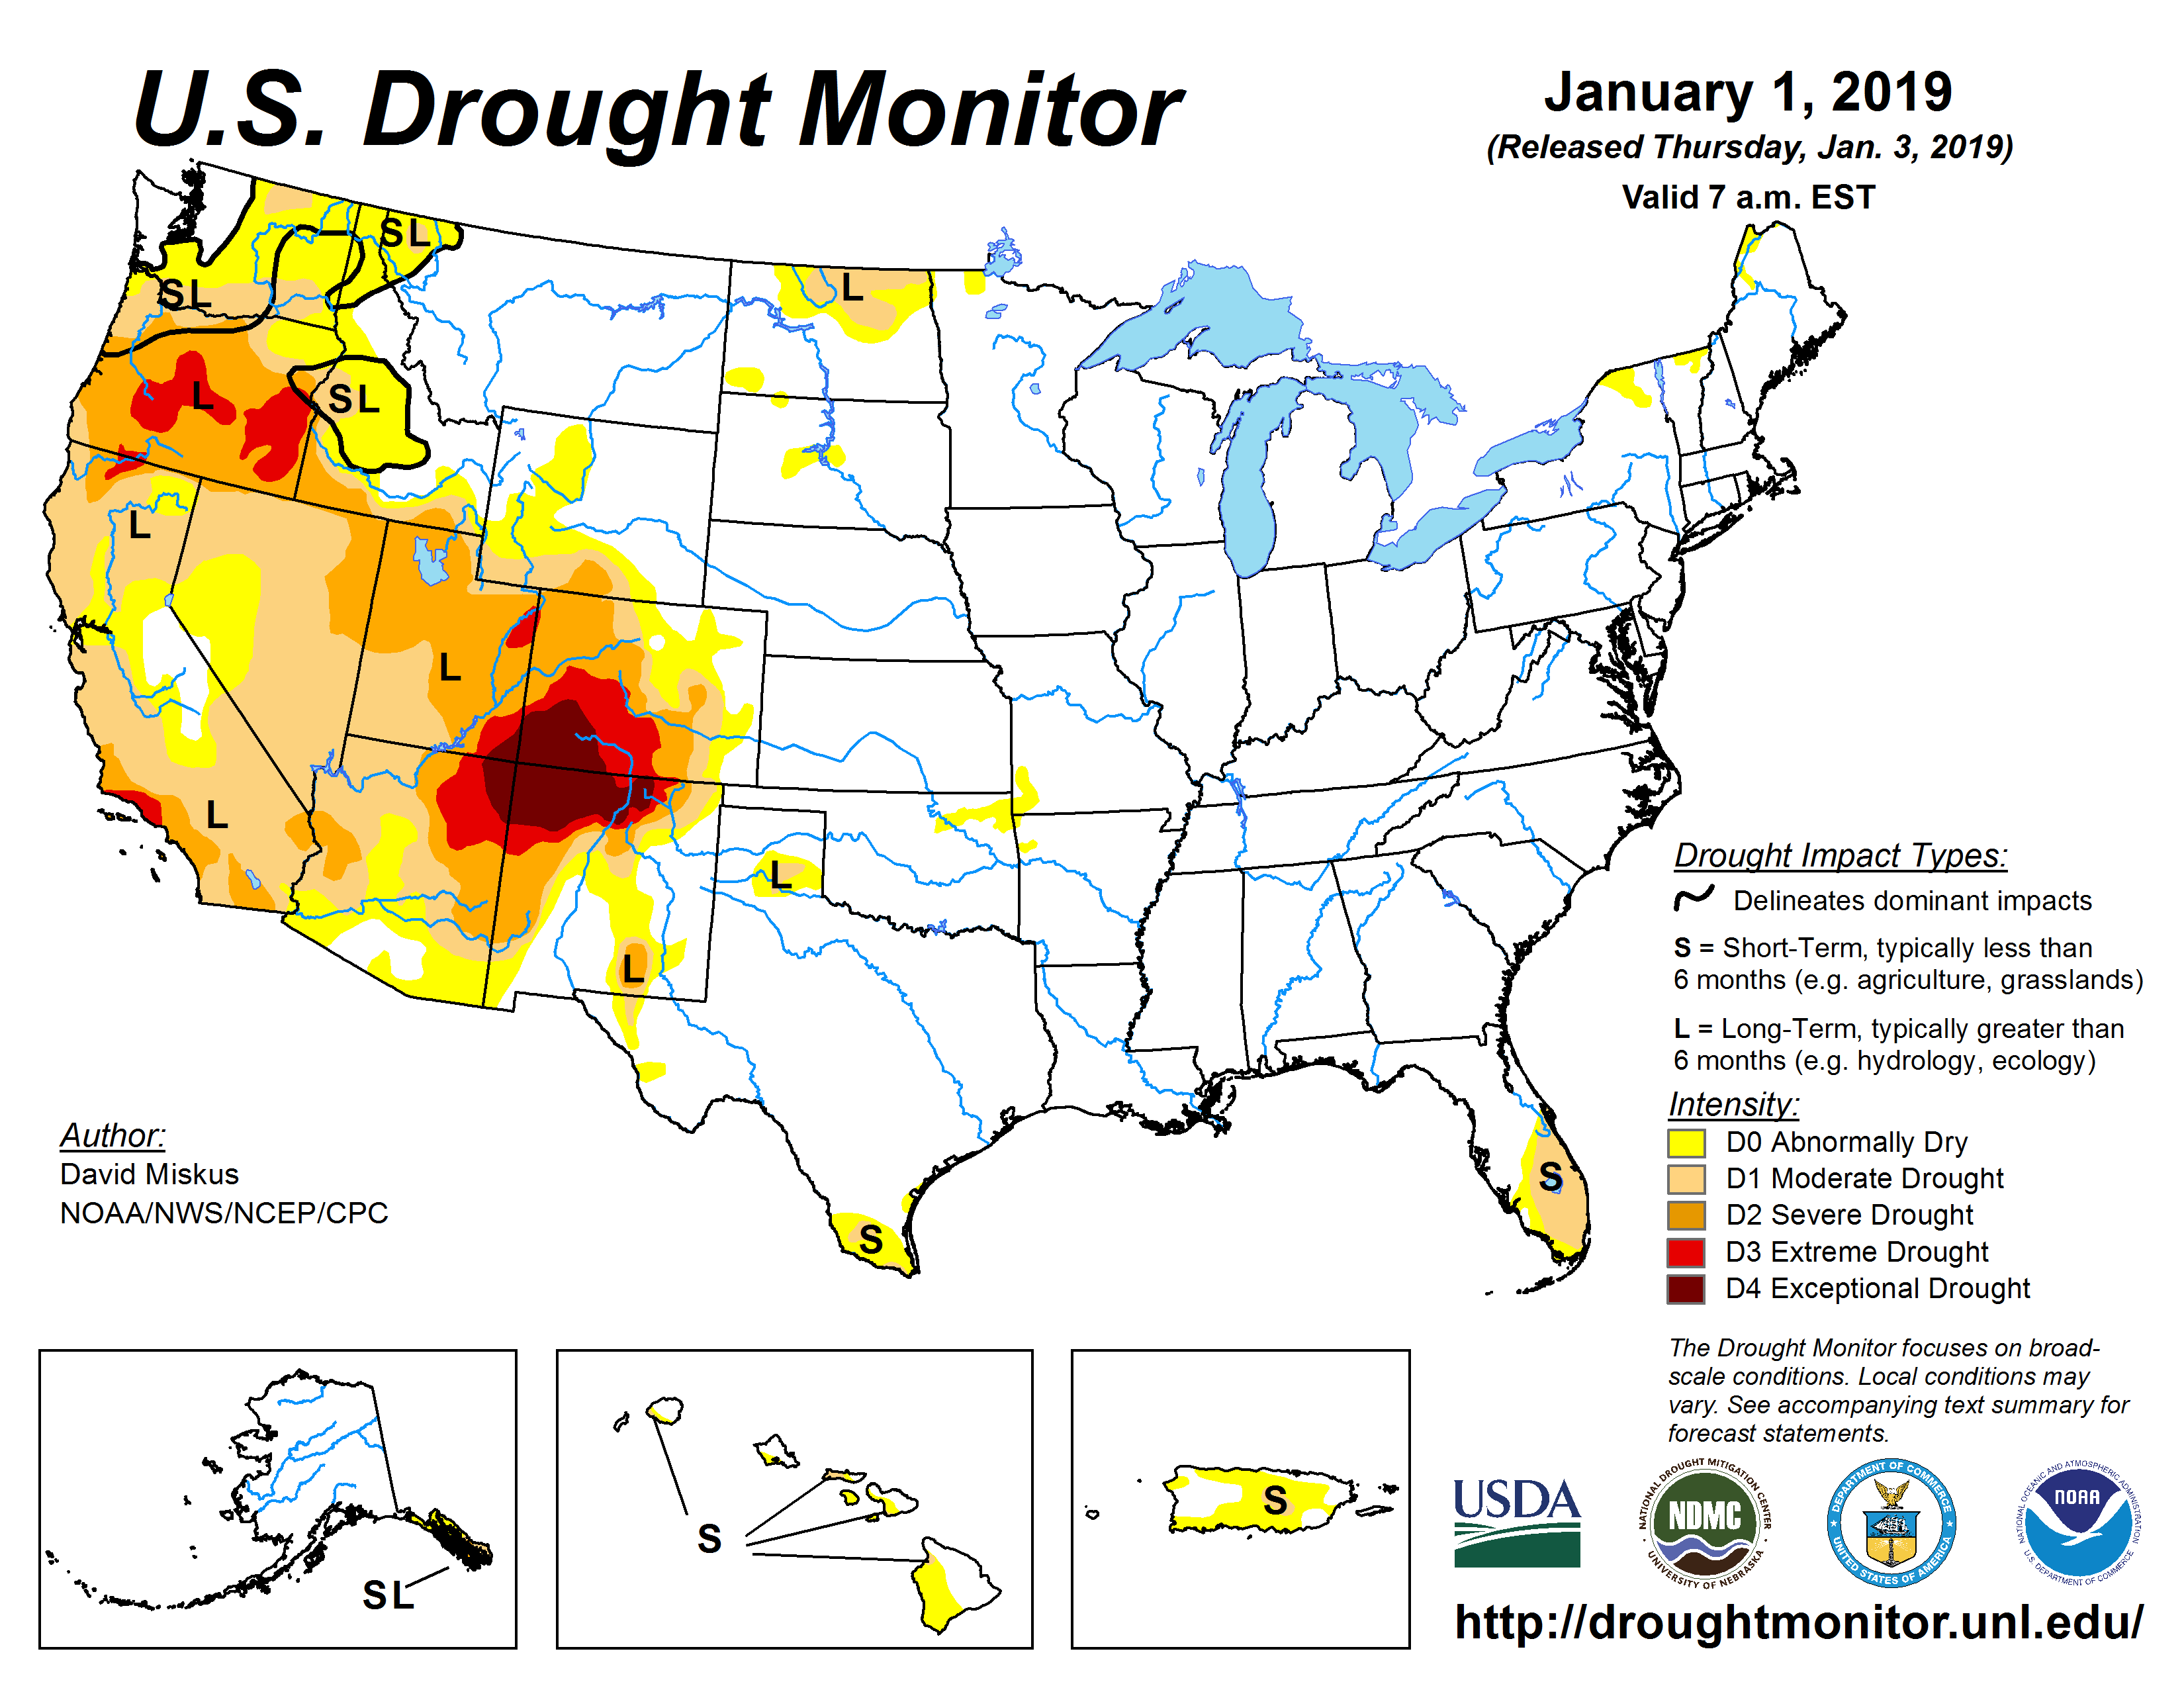 The U.S. Drought Monitor drought map valid January 1, 2019